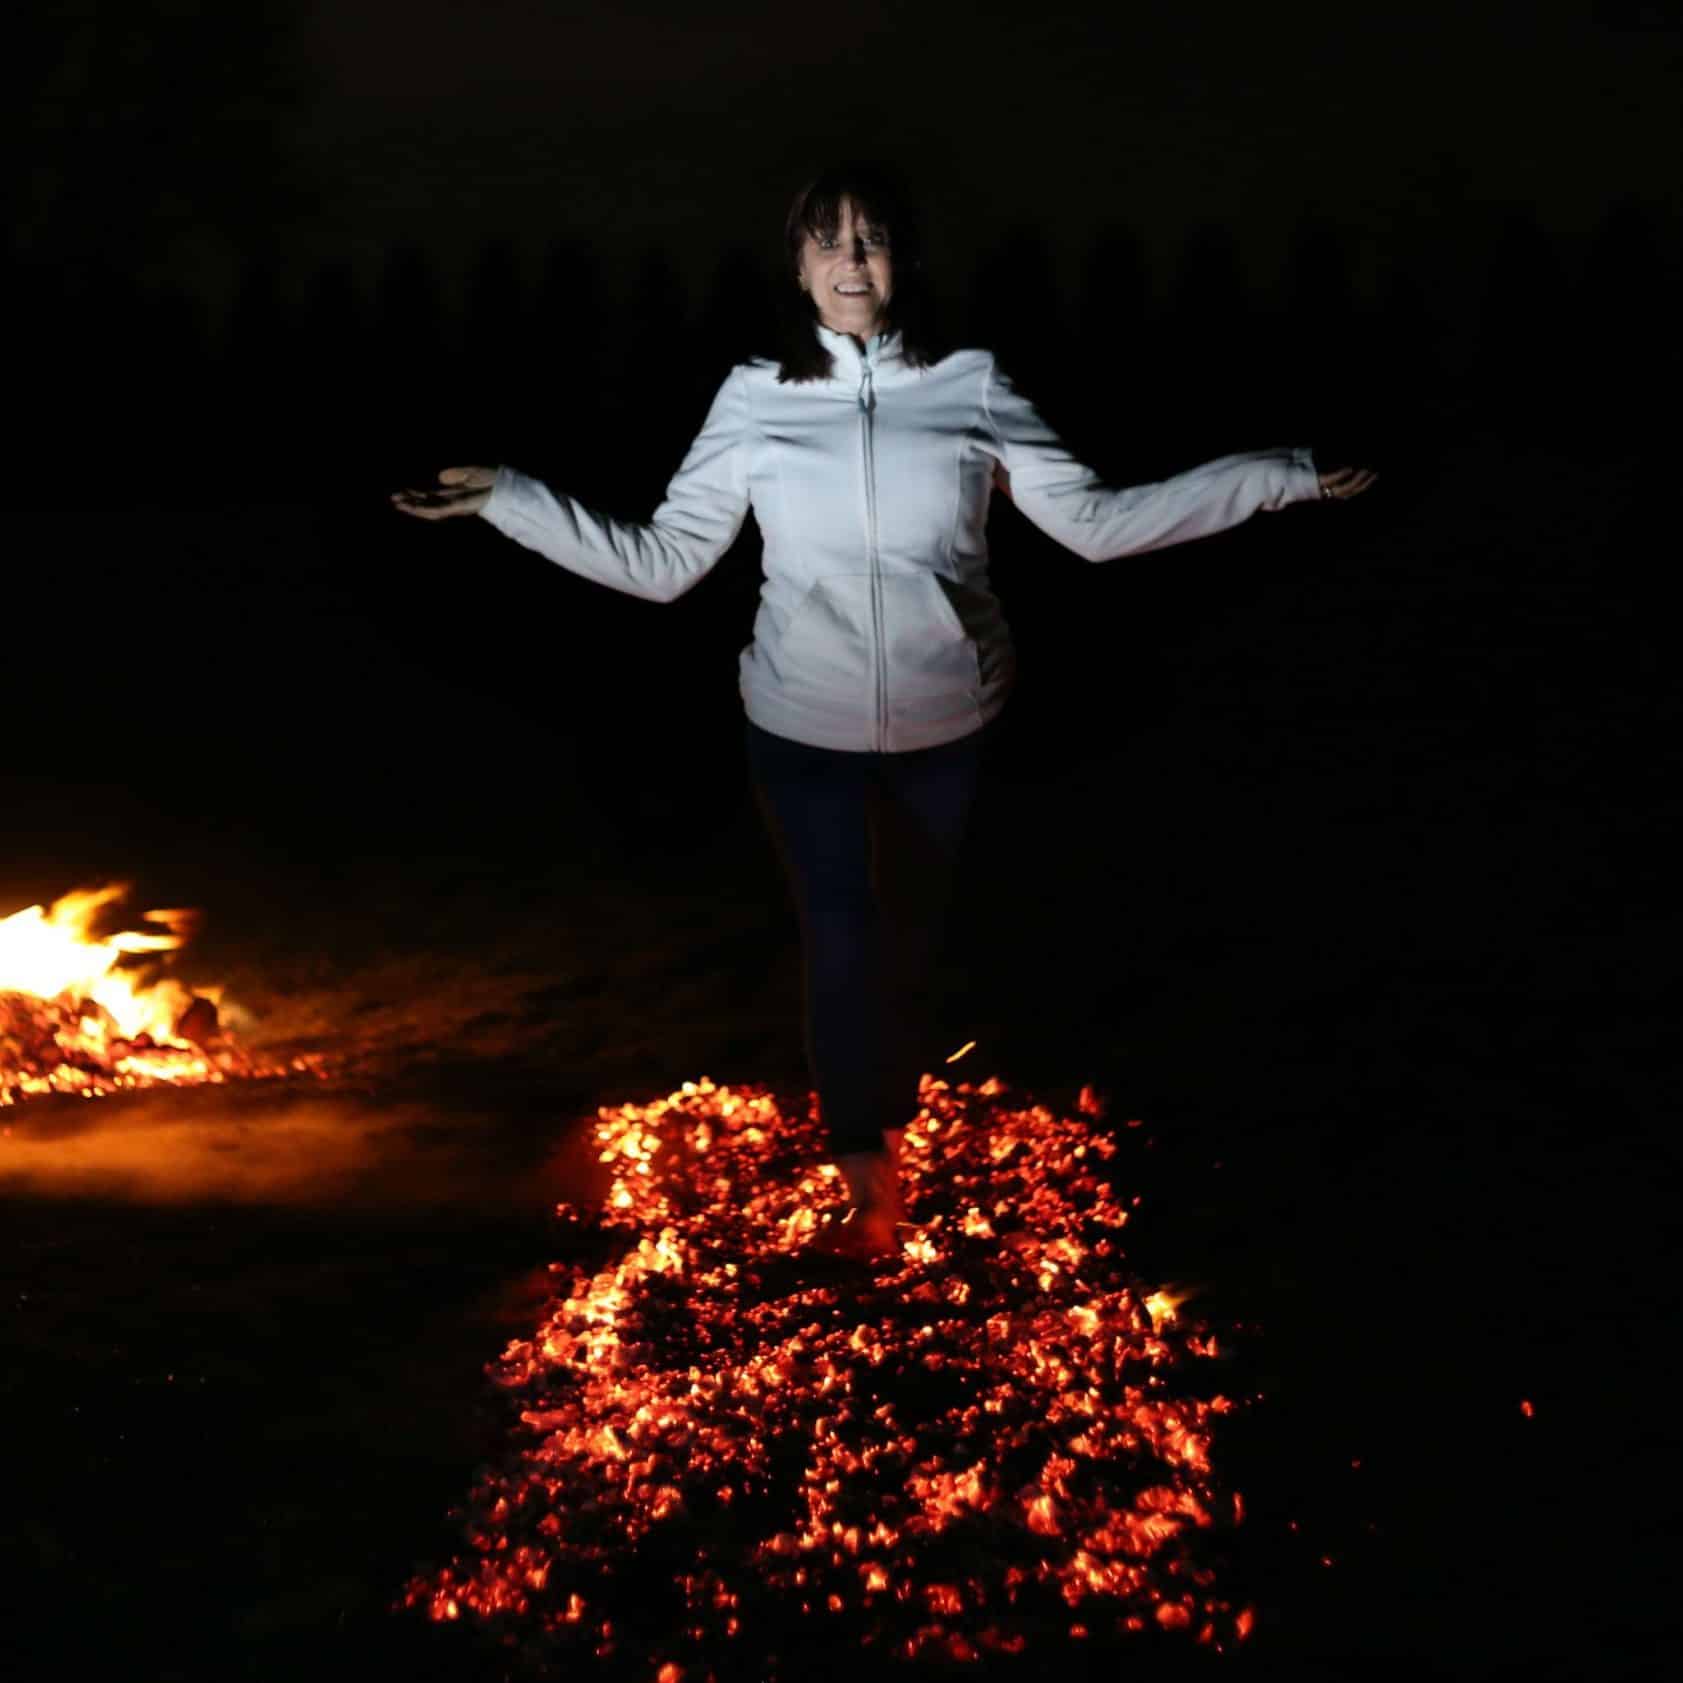 smiling woman walking over bed of glowing red coals